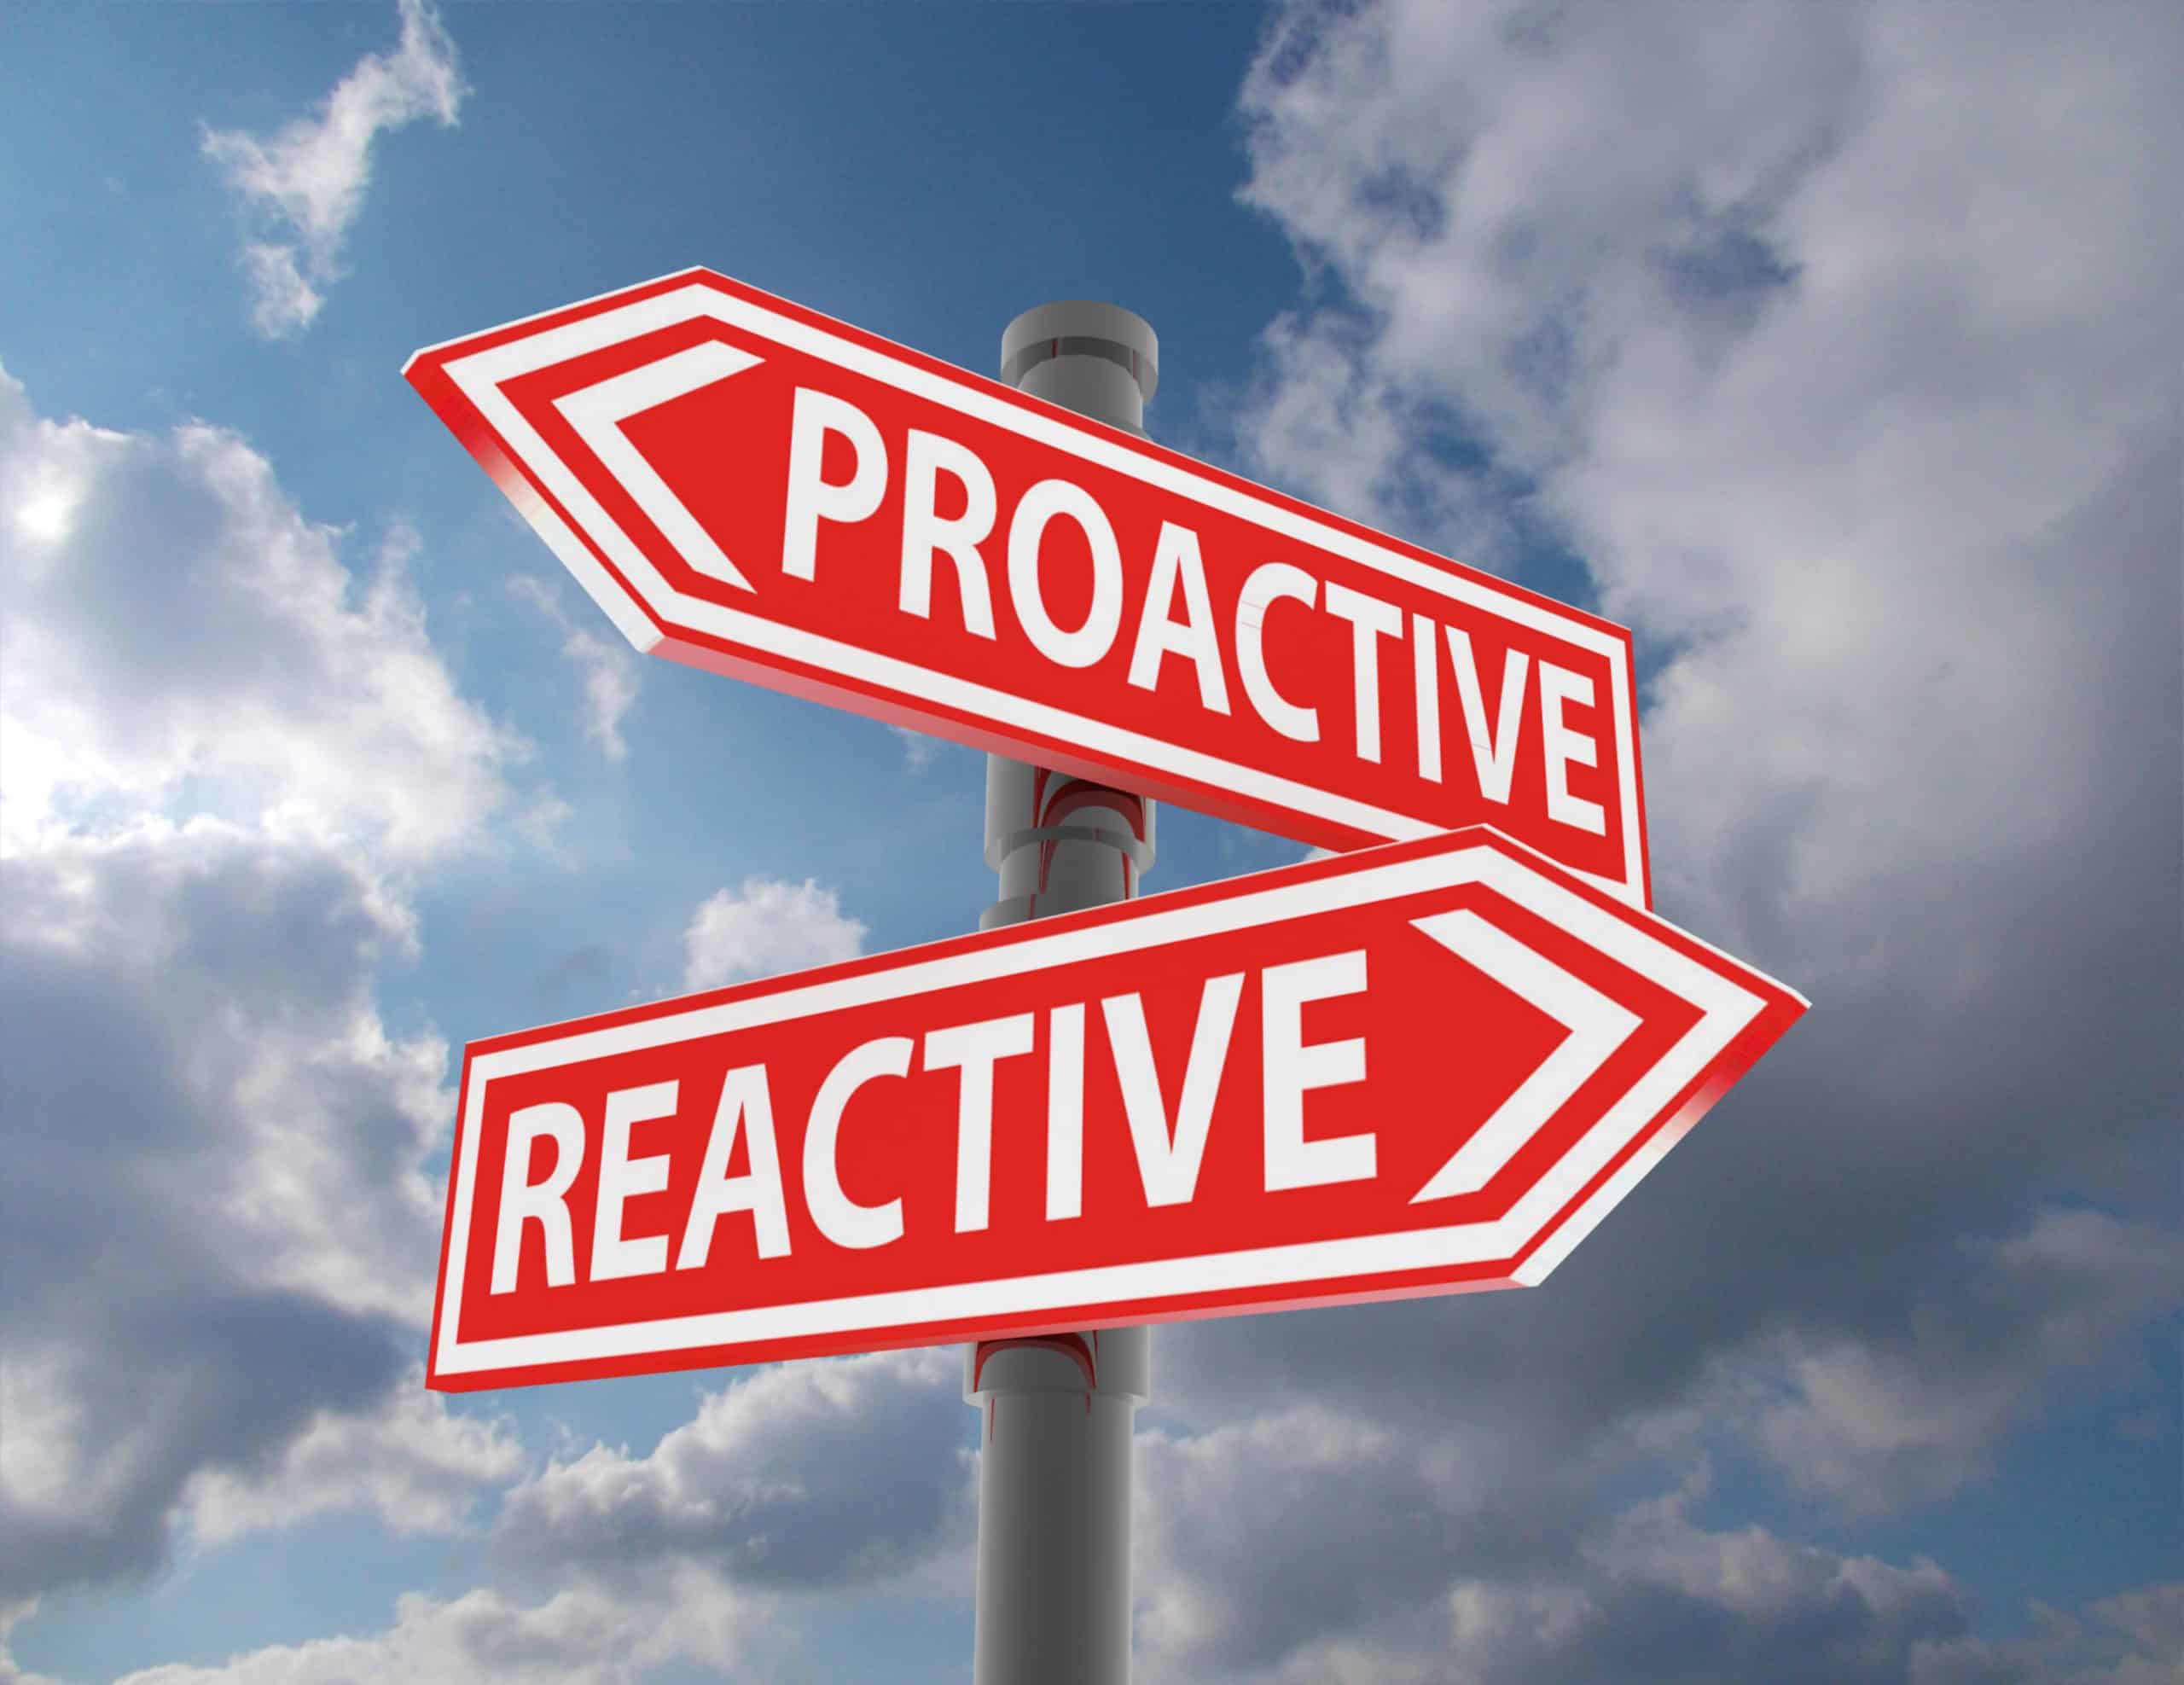 Proactive vs Reactive Cleaning